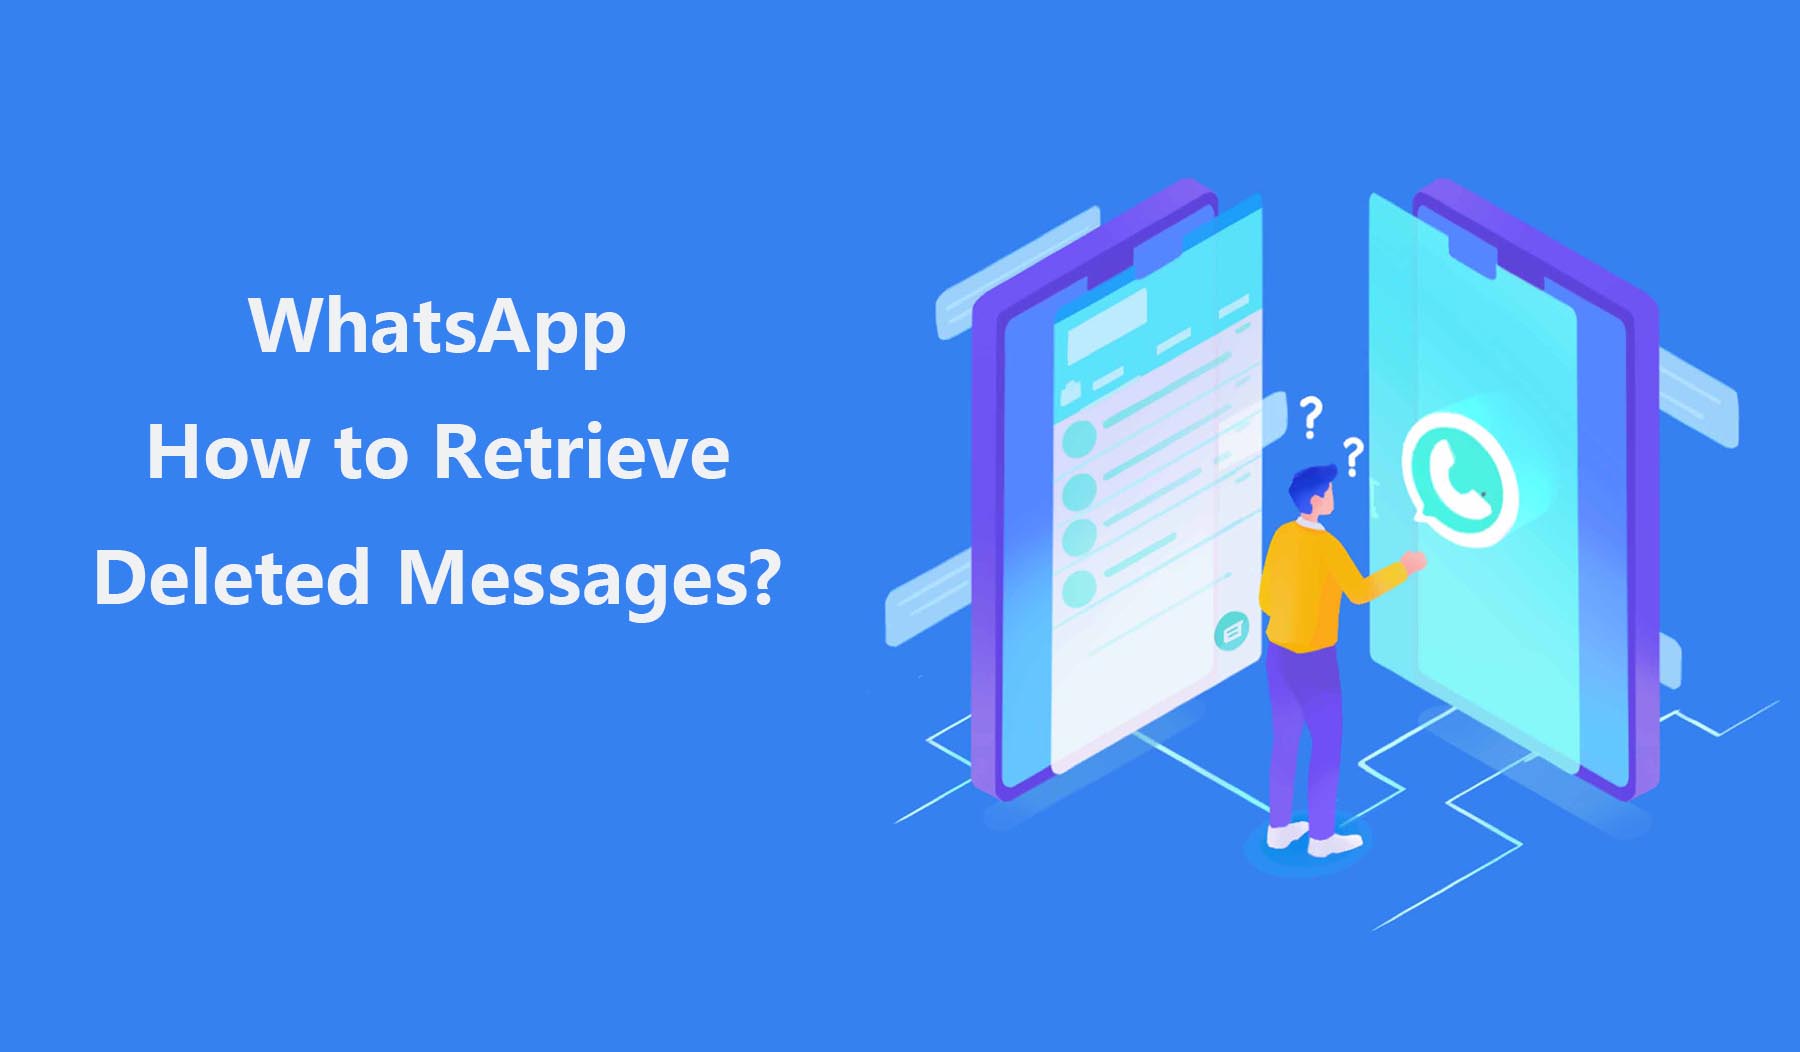 WhatsApp How to Retrieve Deleted Messages